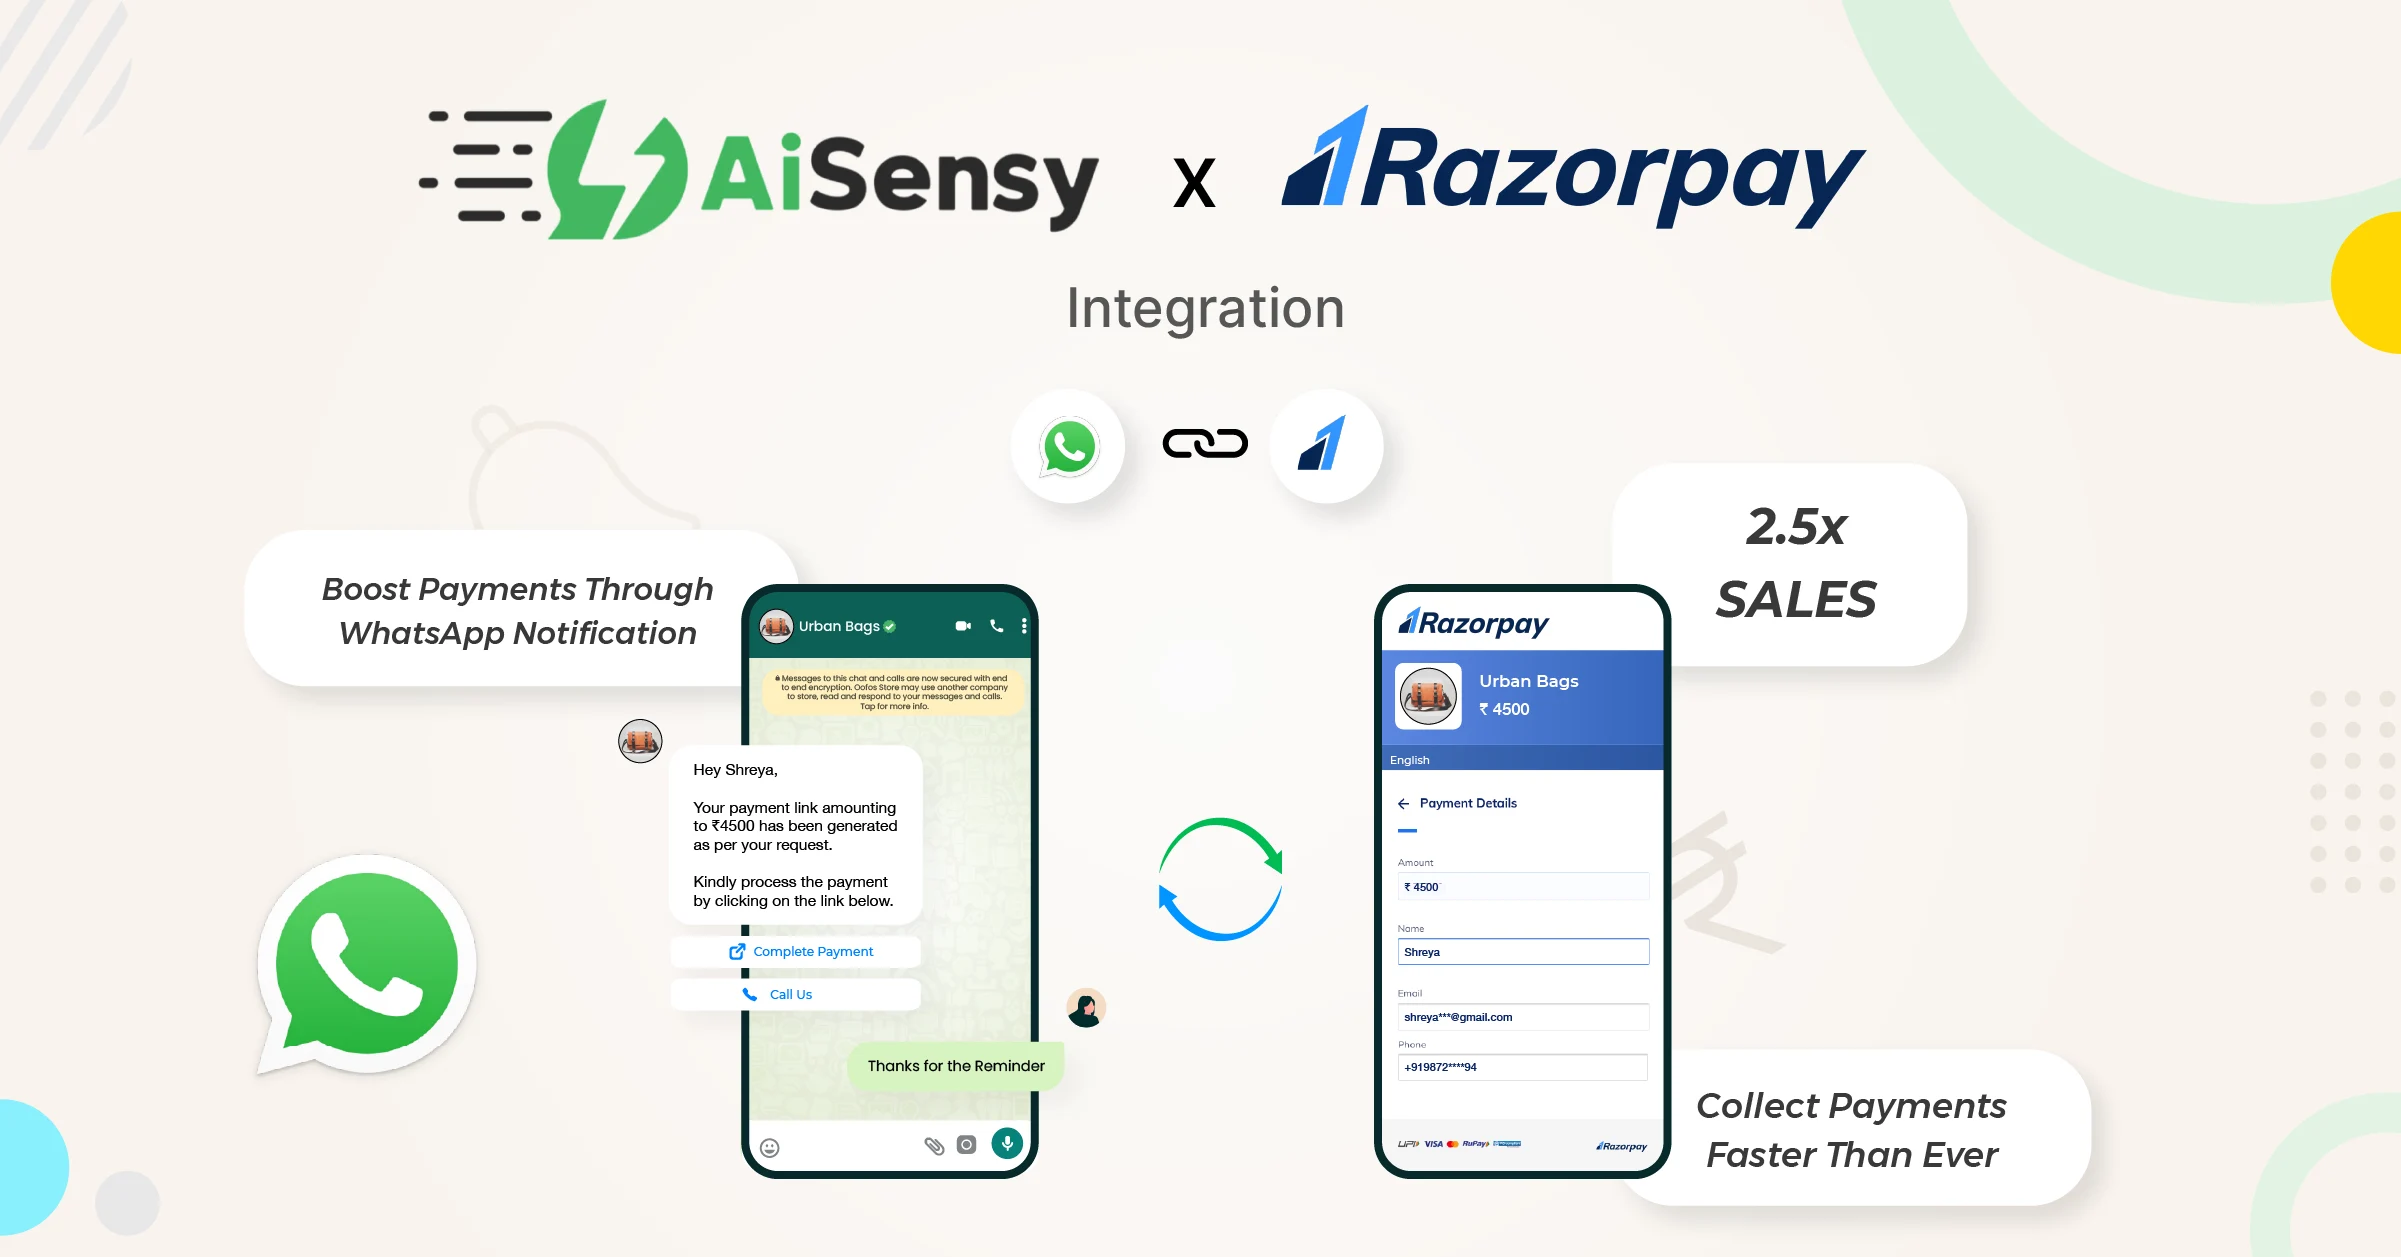 How to connect Razorpay with WhatsApp via AiSensy